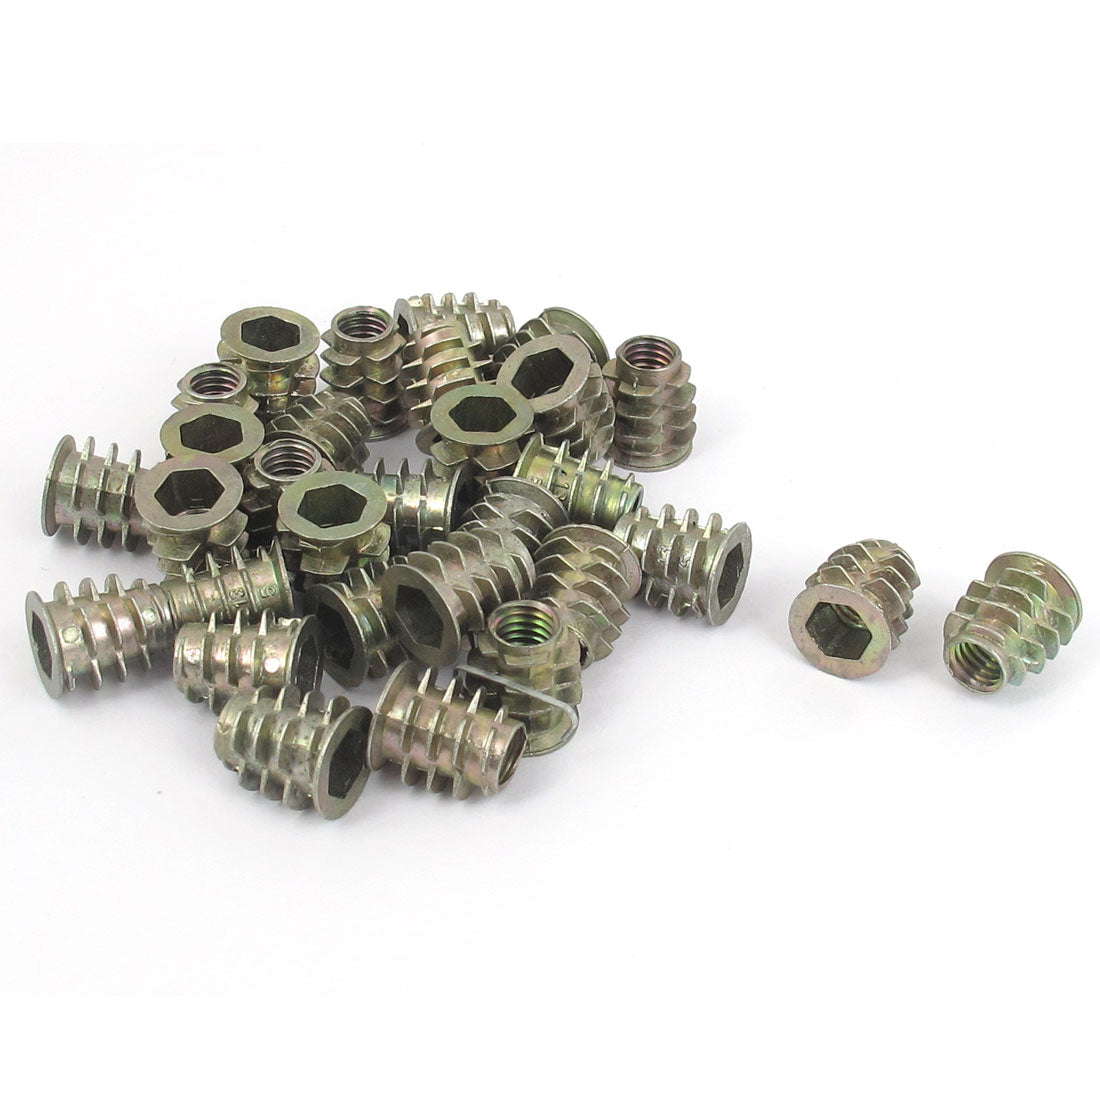 uxcell Uxcell 30 Pcs M6x13mm Zinc Plated Hex Socket Screw in Thread Insert Nut for Wood